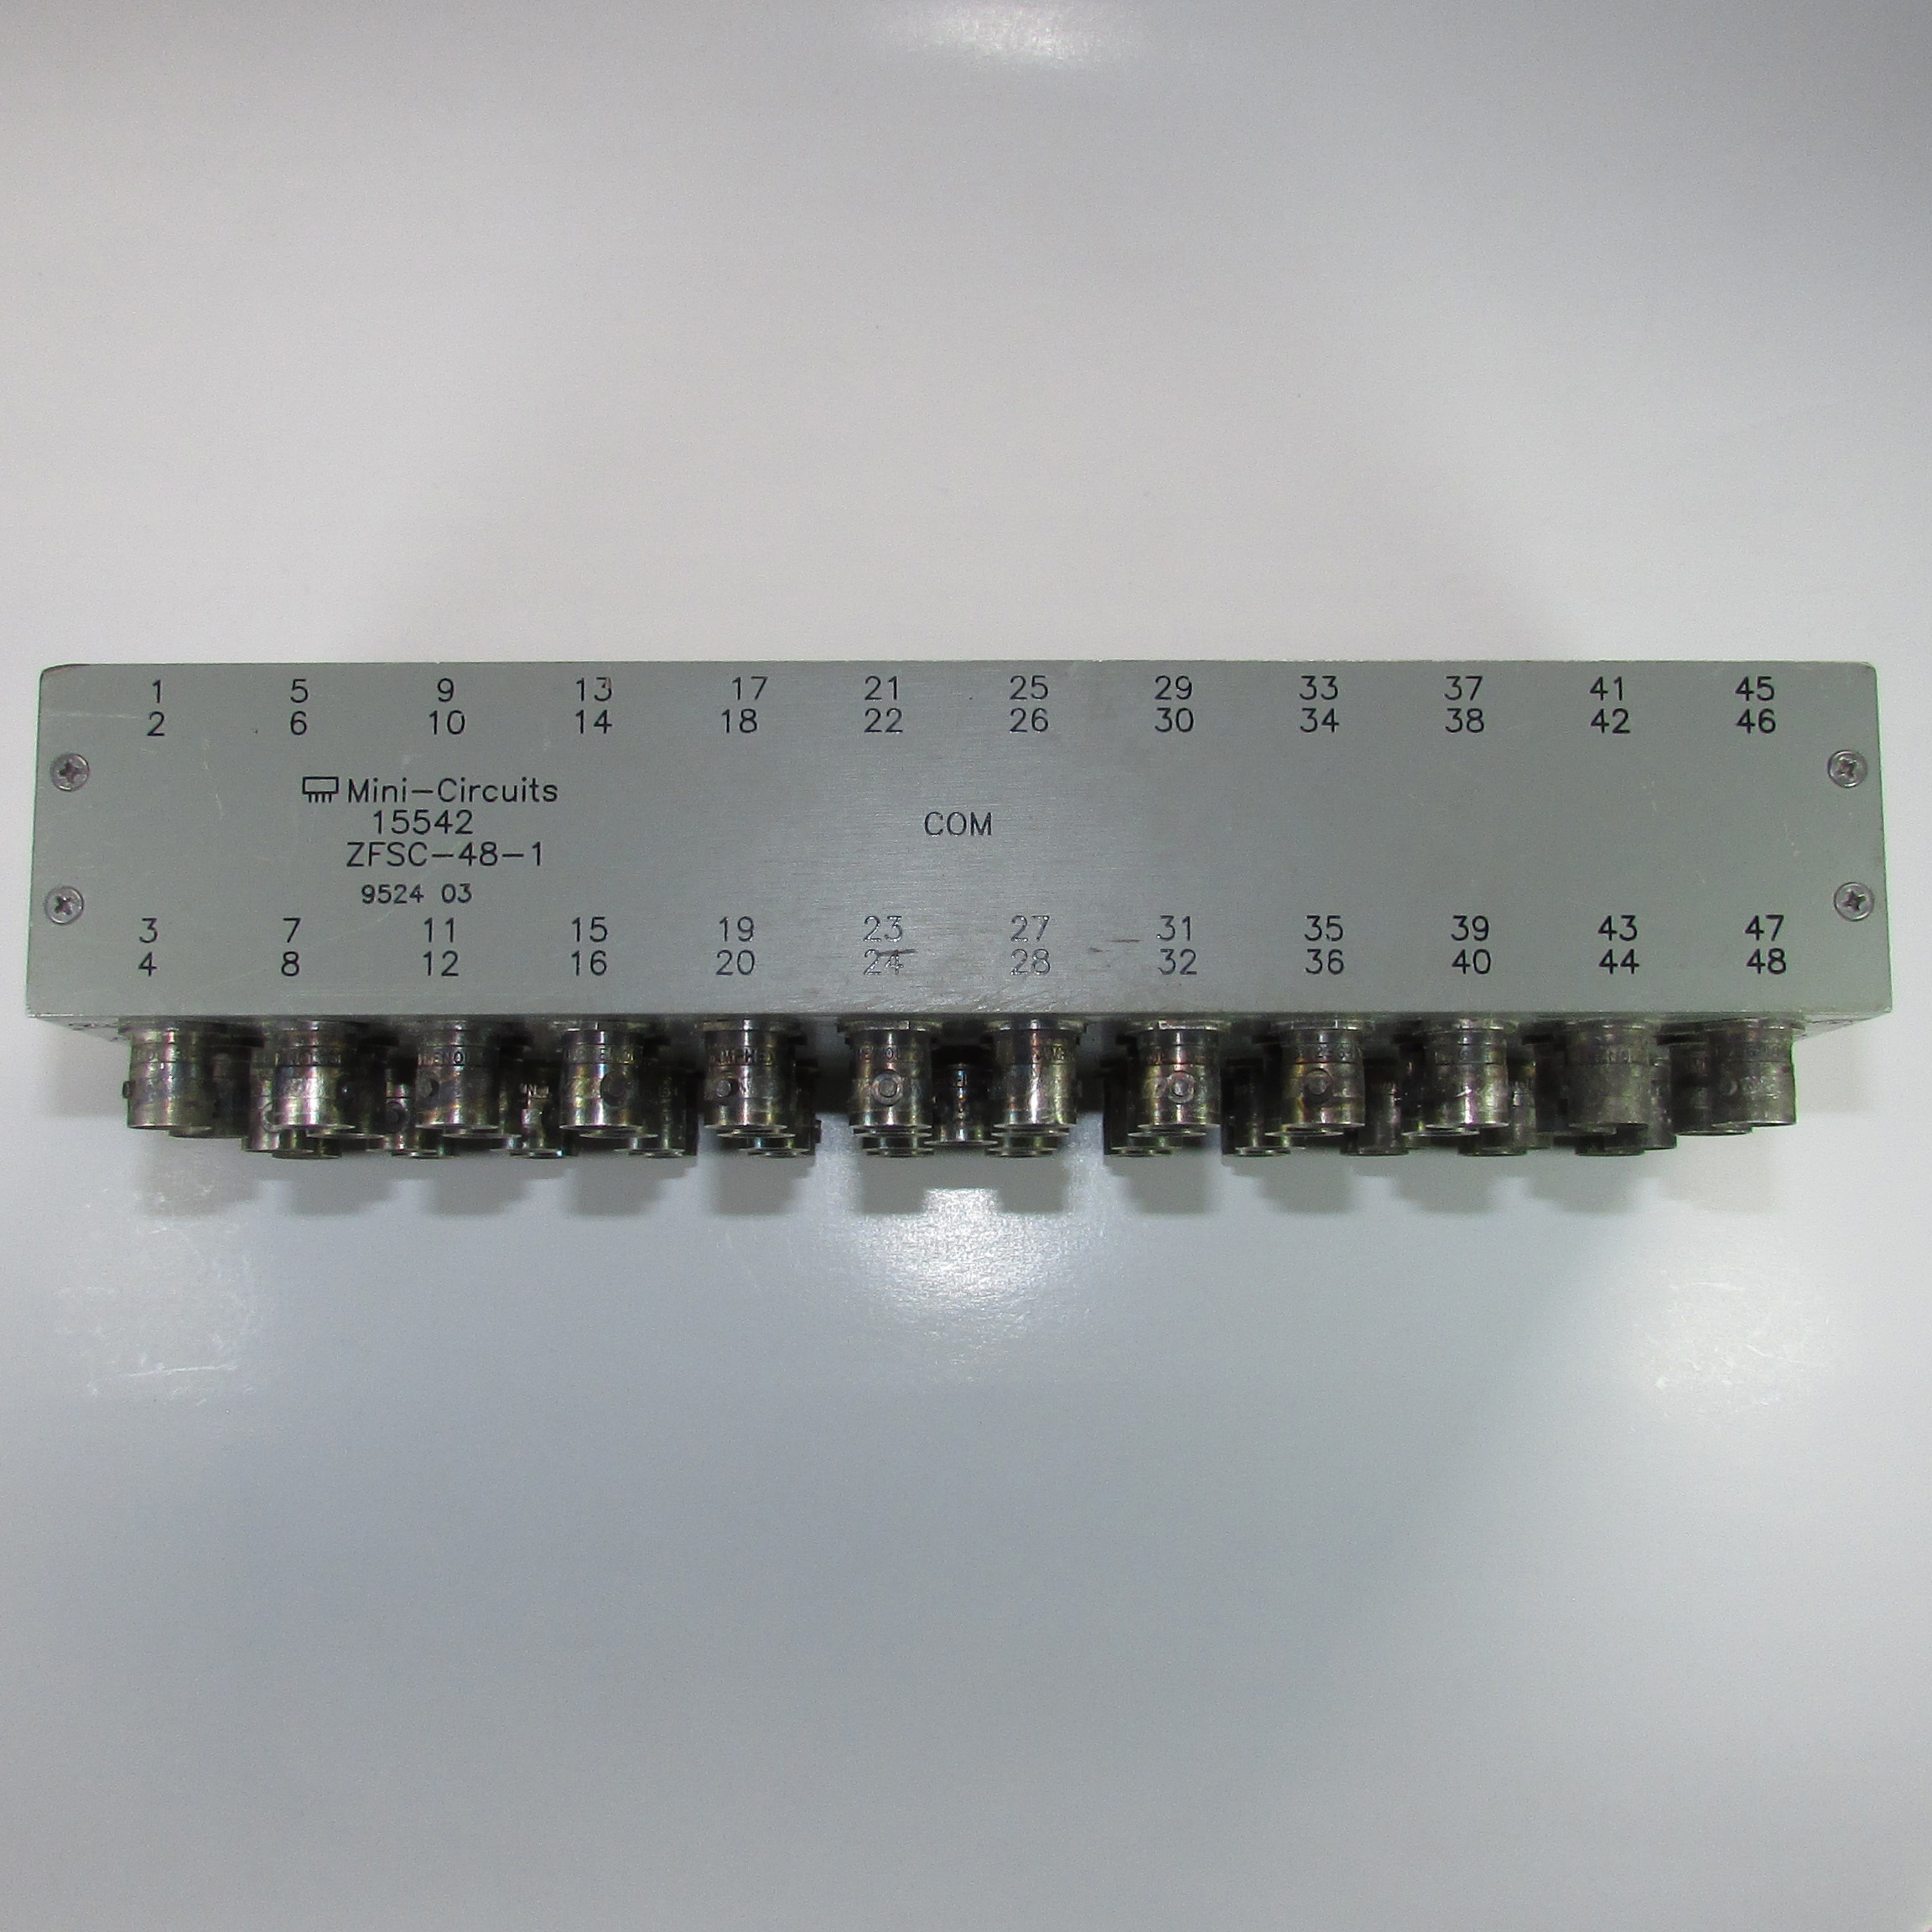 Mini-Circuits ZFSC-48-1 10-300MHz BNC RF coaxial one-minute 48-way power divider